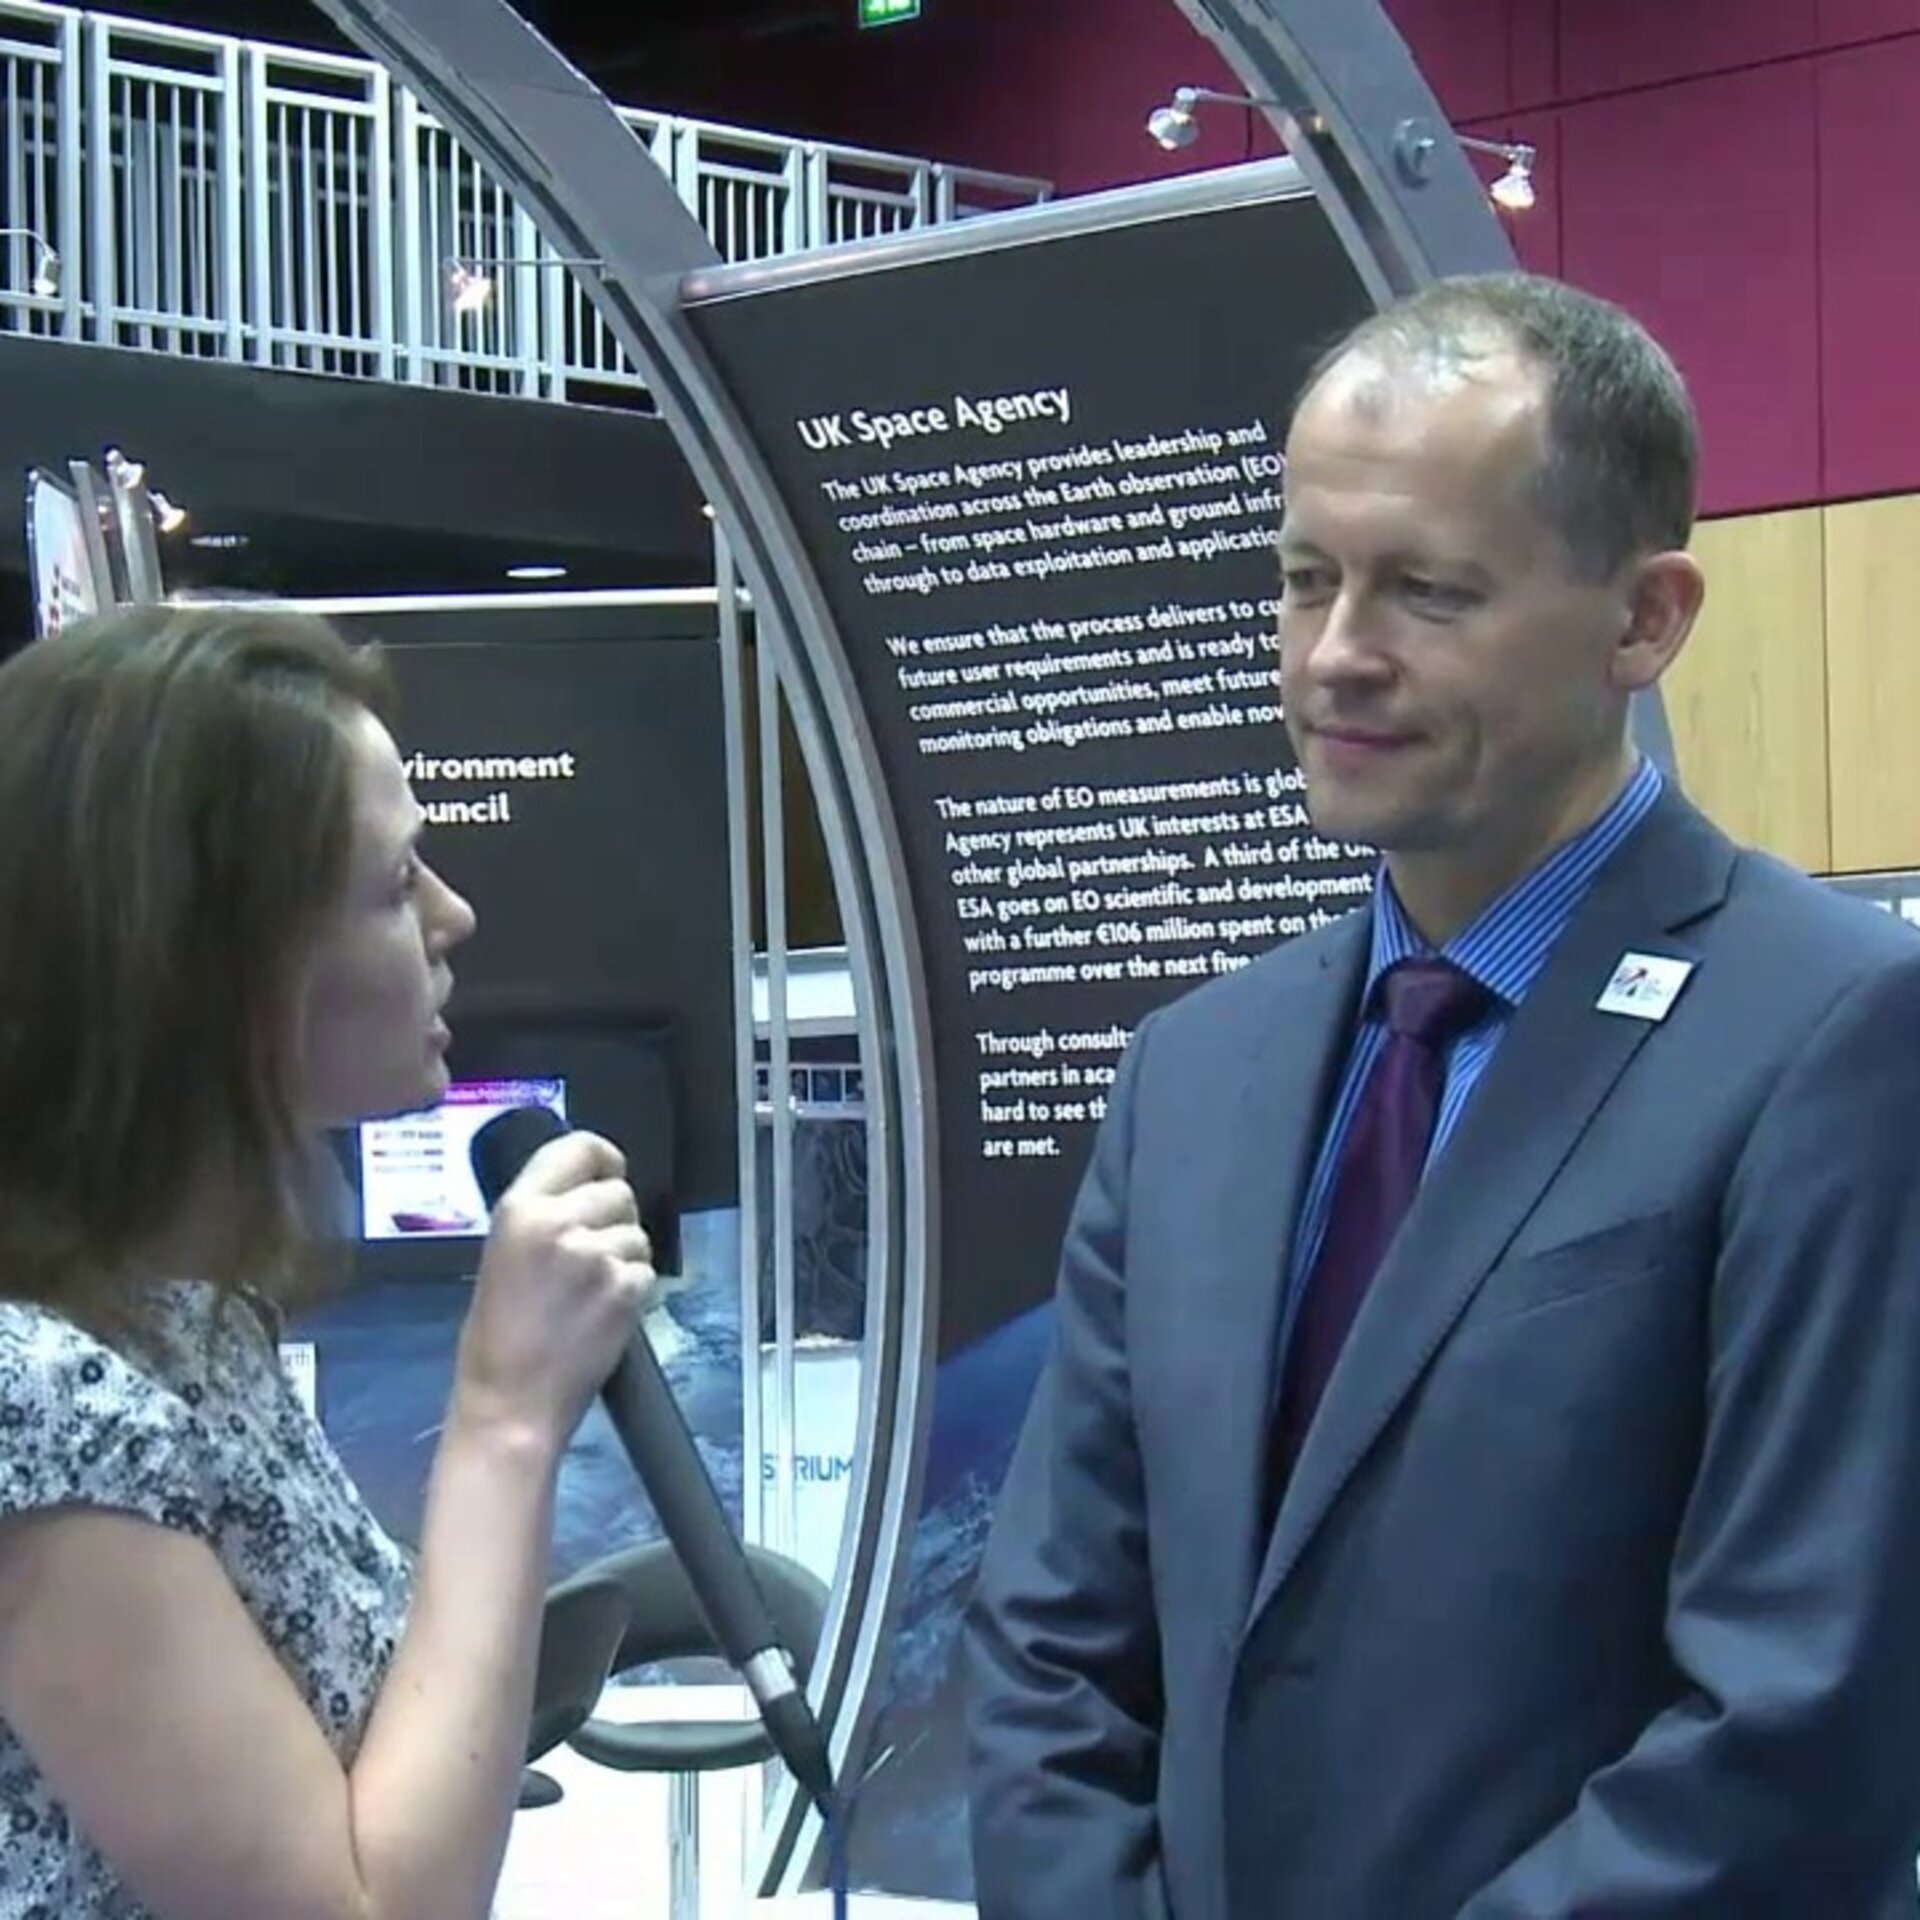 Interview with David Parker, UK Space Agency Chief Executive